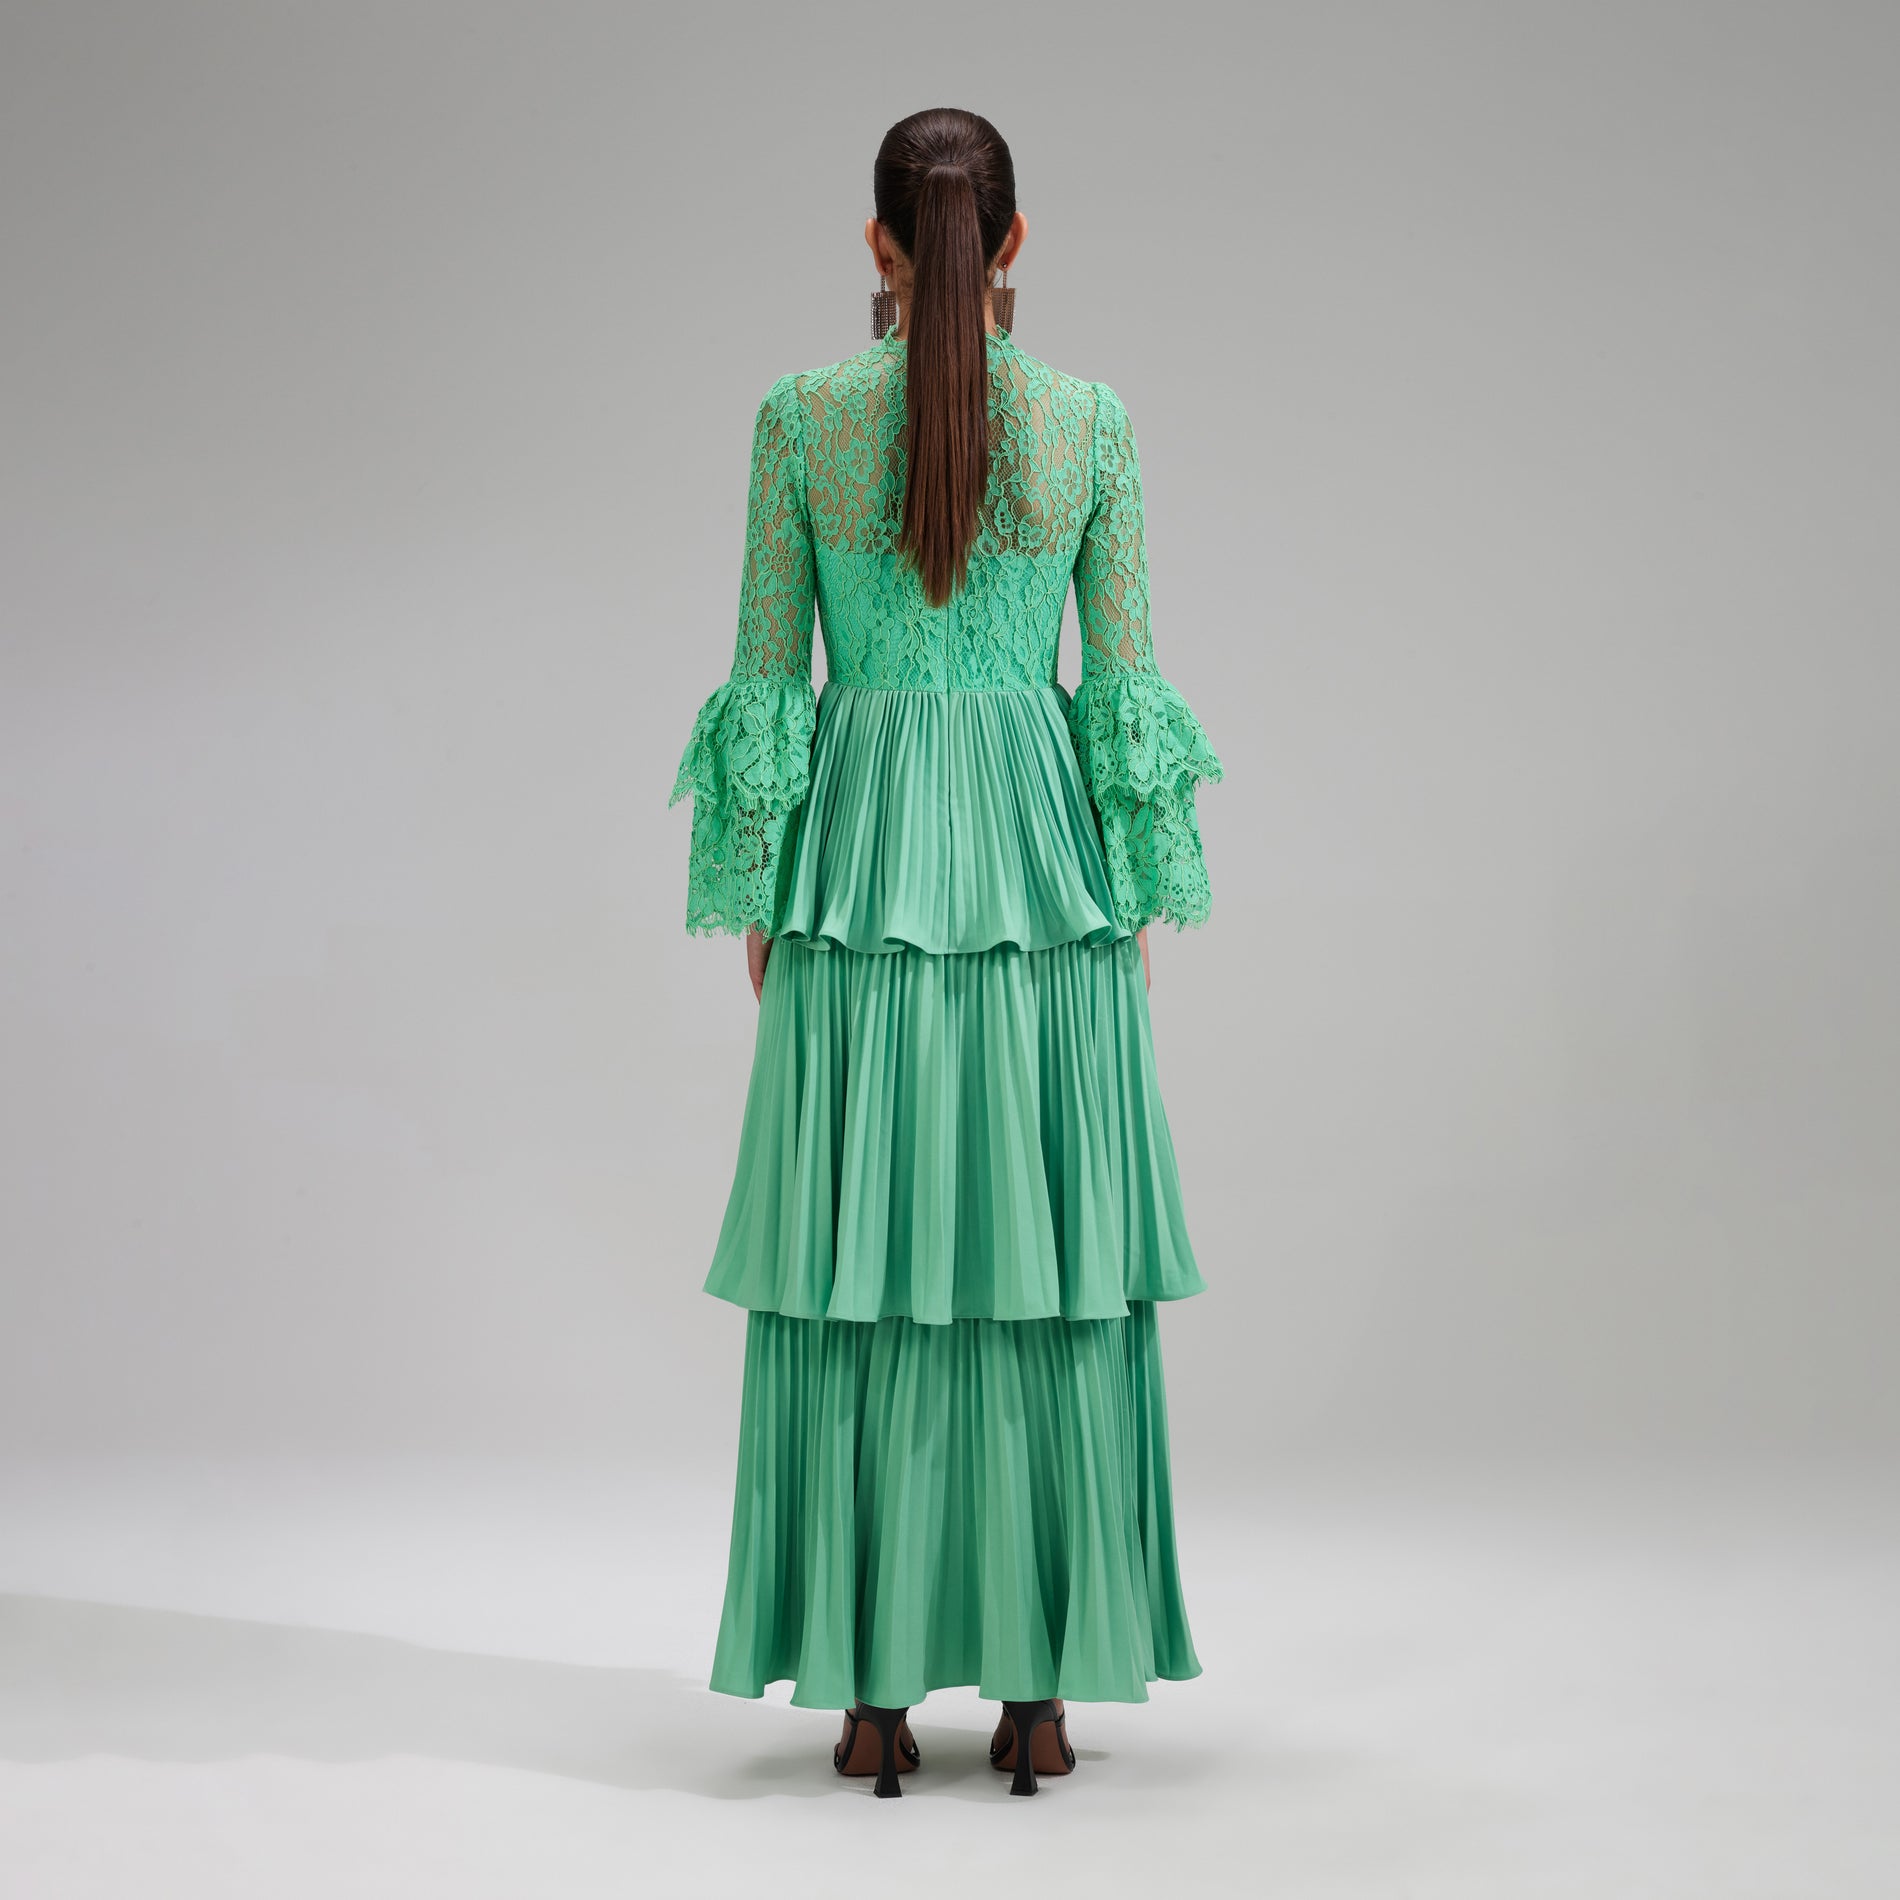 A woman wearing the Green Tiered Cord Lace Maxi Dress